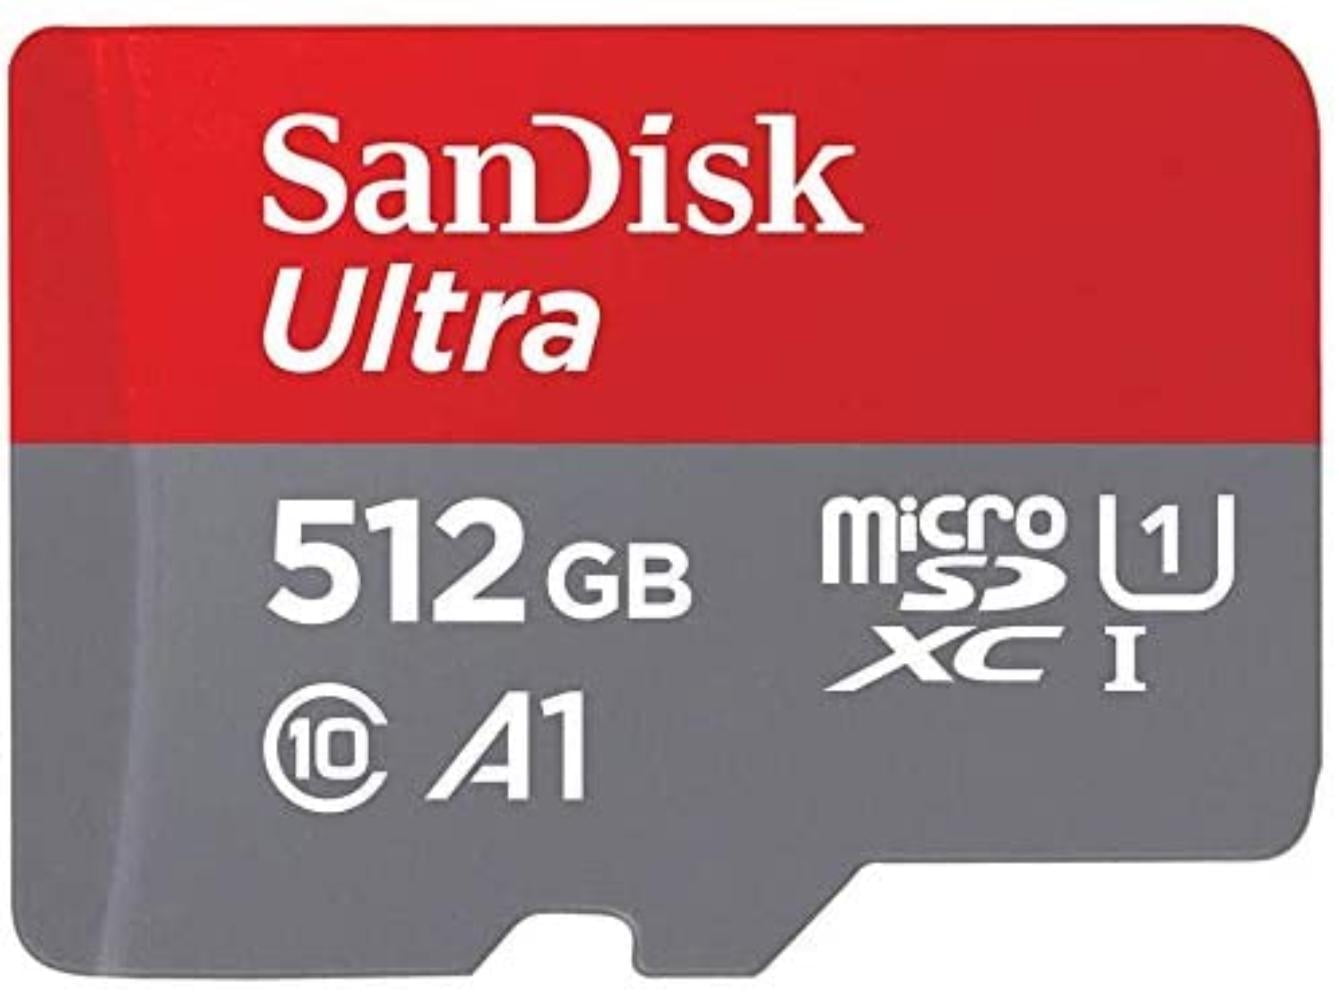 SanDisk Ultra Class 10 512GB Micro Memory Card Works with LG G8X ThinQ, LG  v40 ThinQ, LG G7 ThinQ Cell Phone (SDSQUAR-512G-GN6MN) Bundle with (1) 